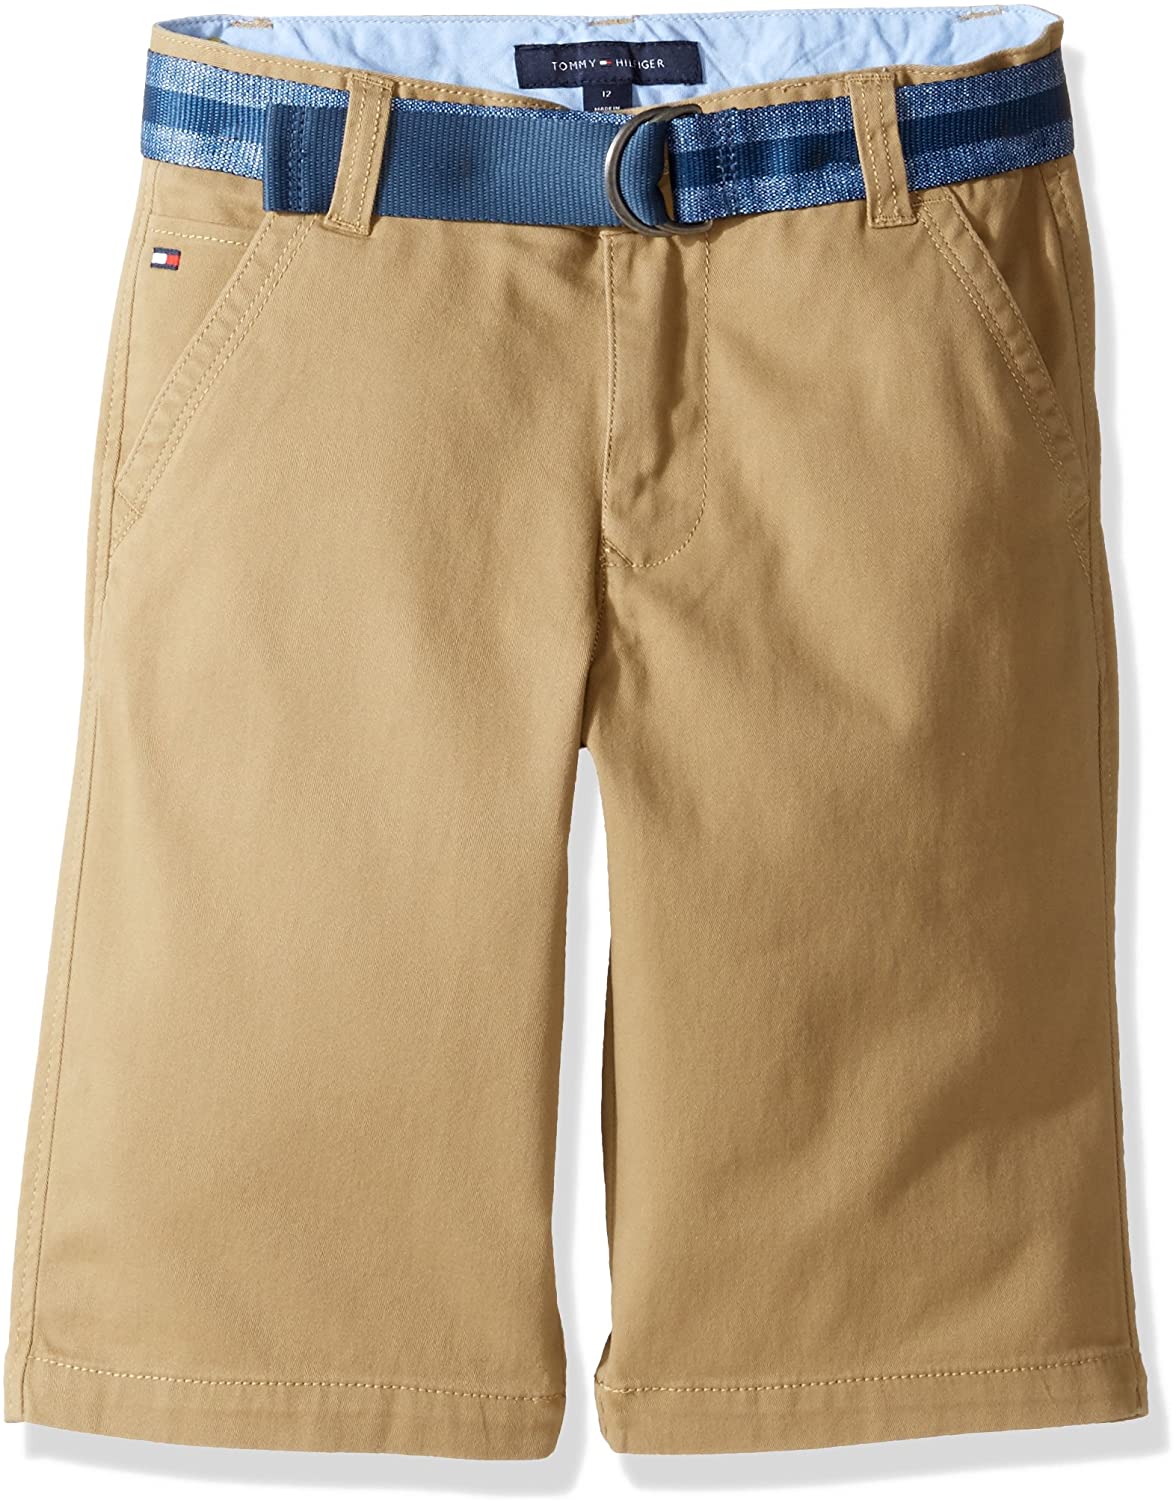 SAY YAS CLOTHING Boys' Chester Flat-Front Short Tommy Chino